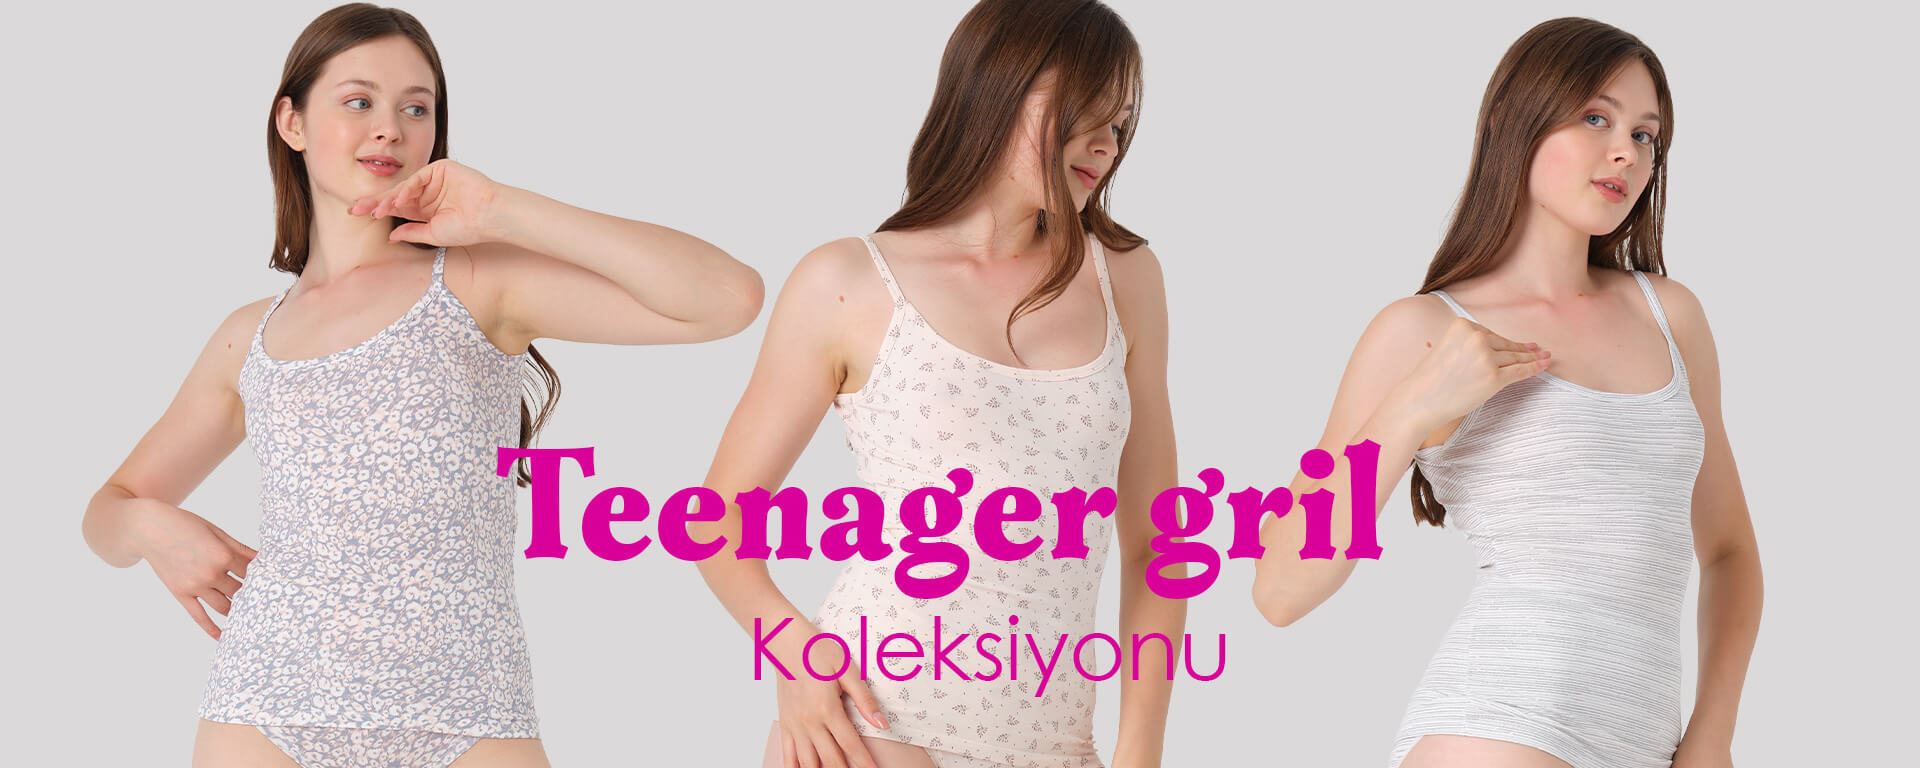 teenager gril